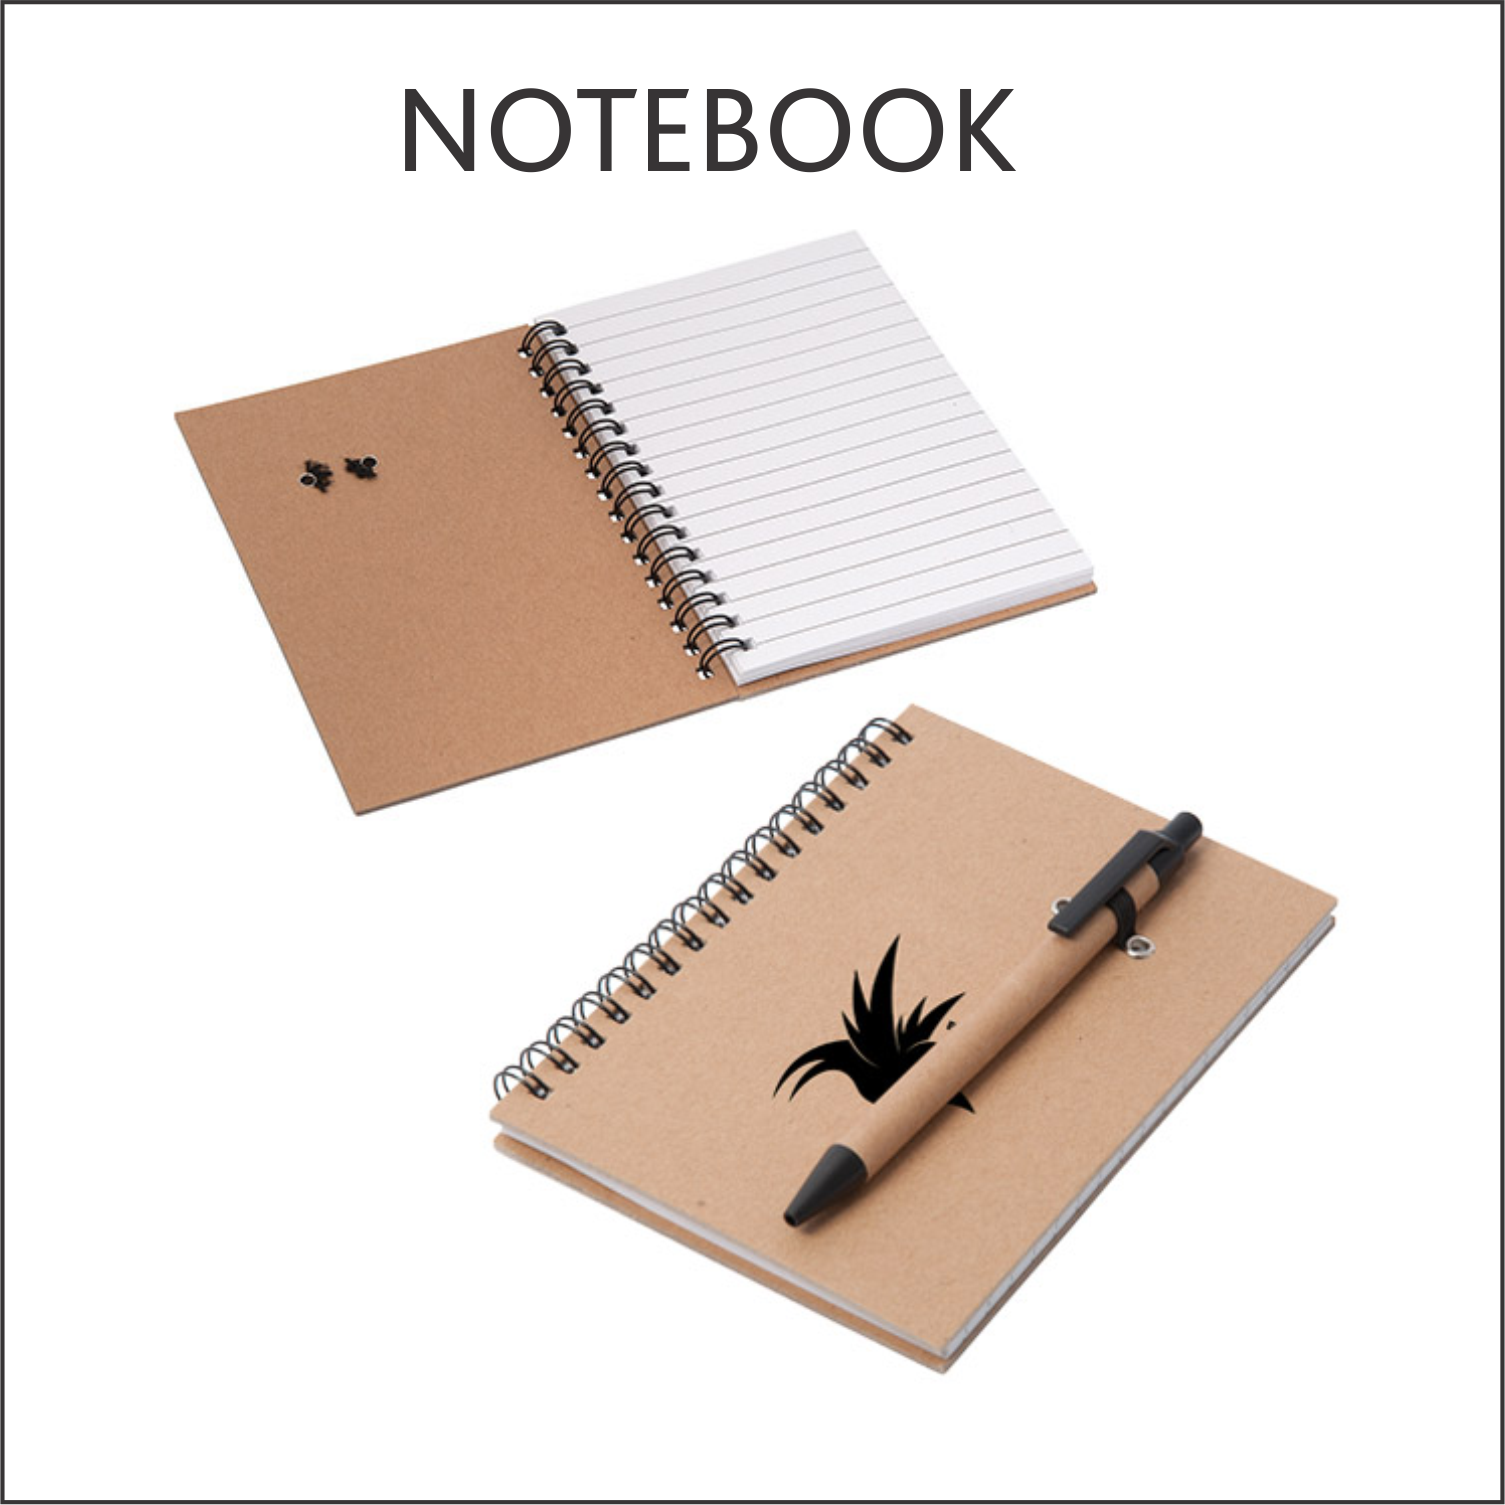 NOTEBOOK.png